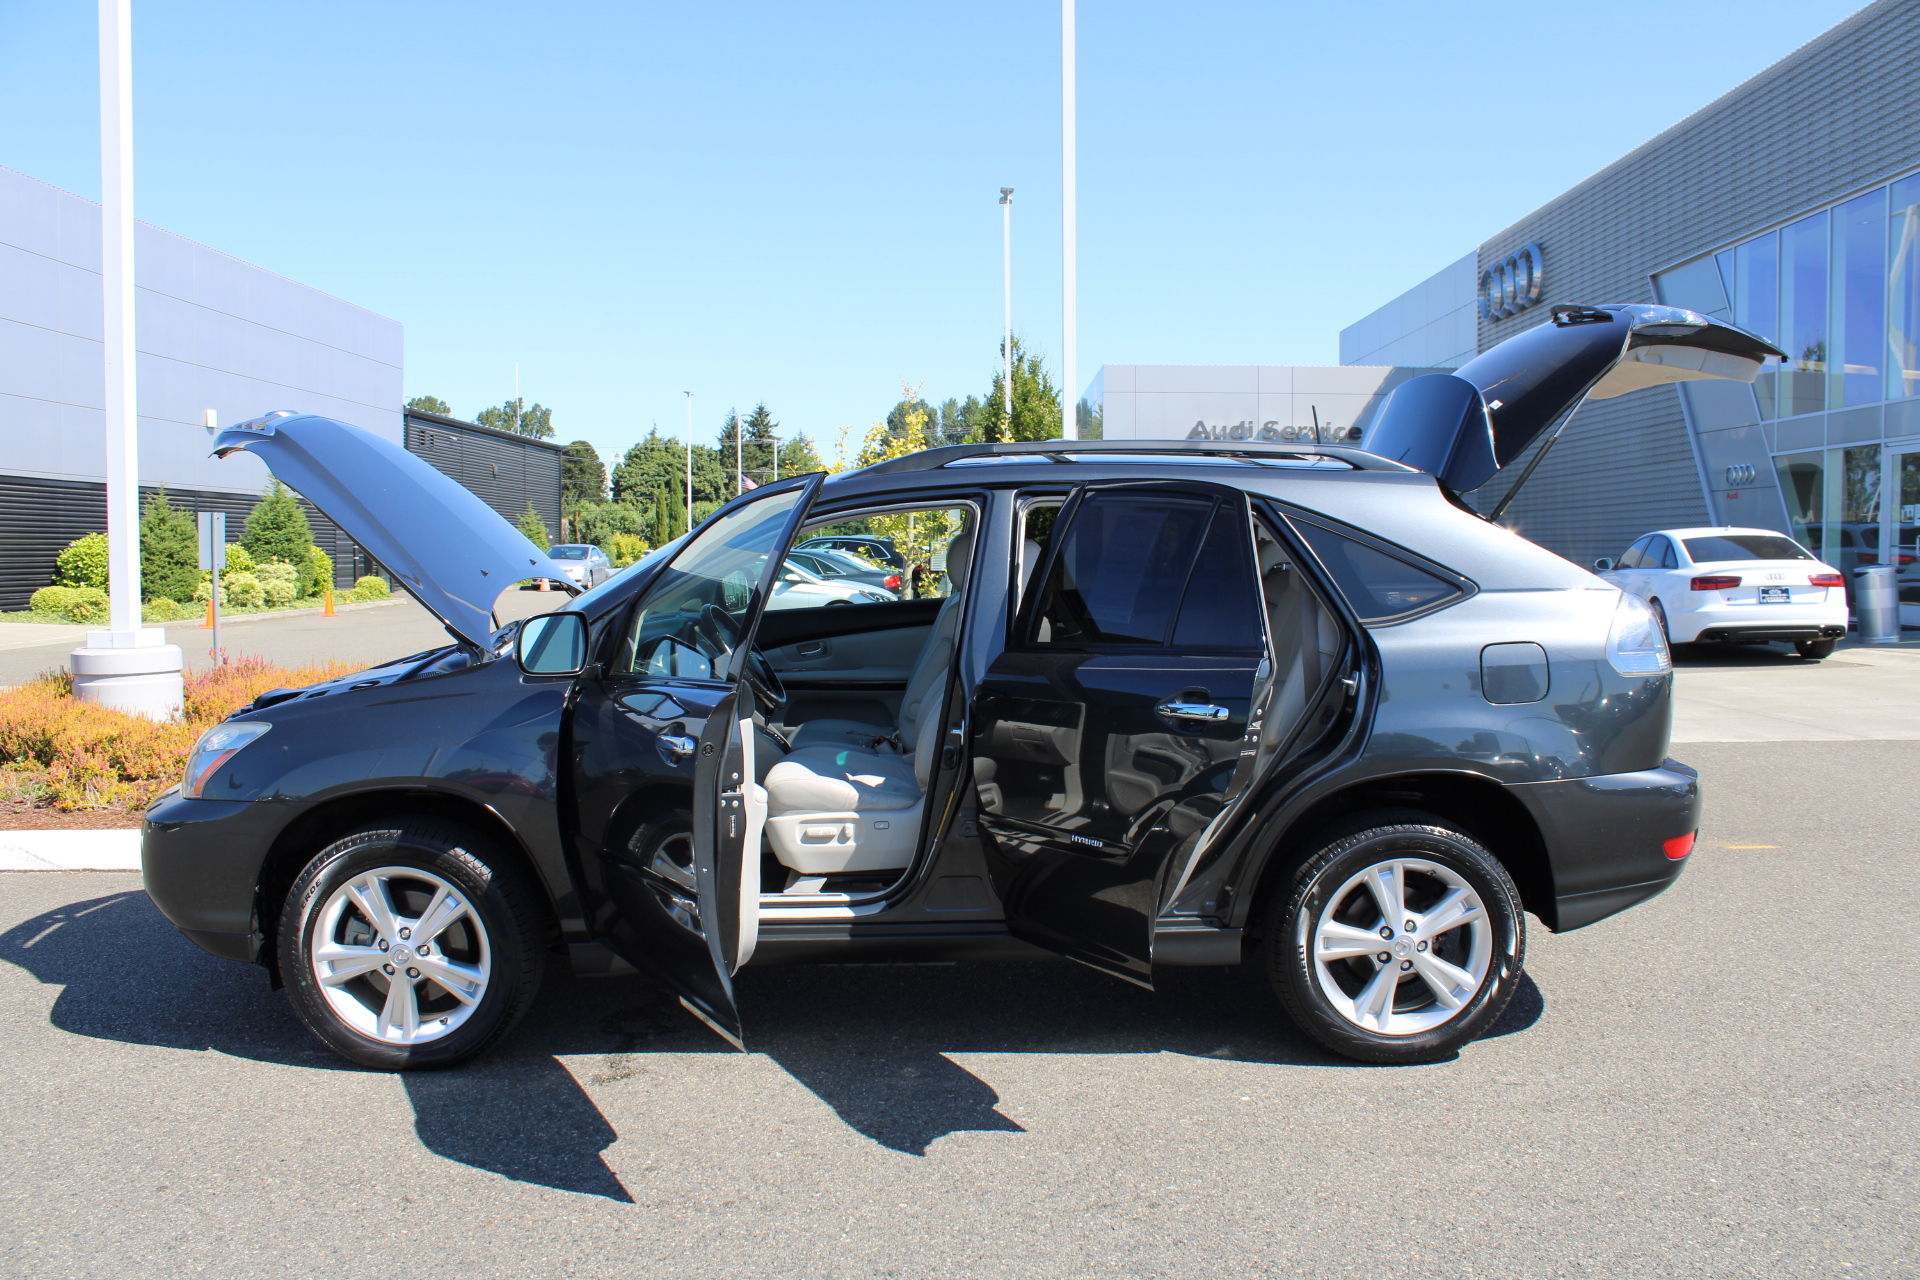 PreOwned 2008 Lexus RX 400h 4D Sport Utility in Fife 